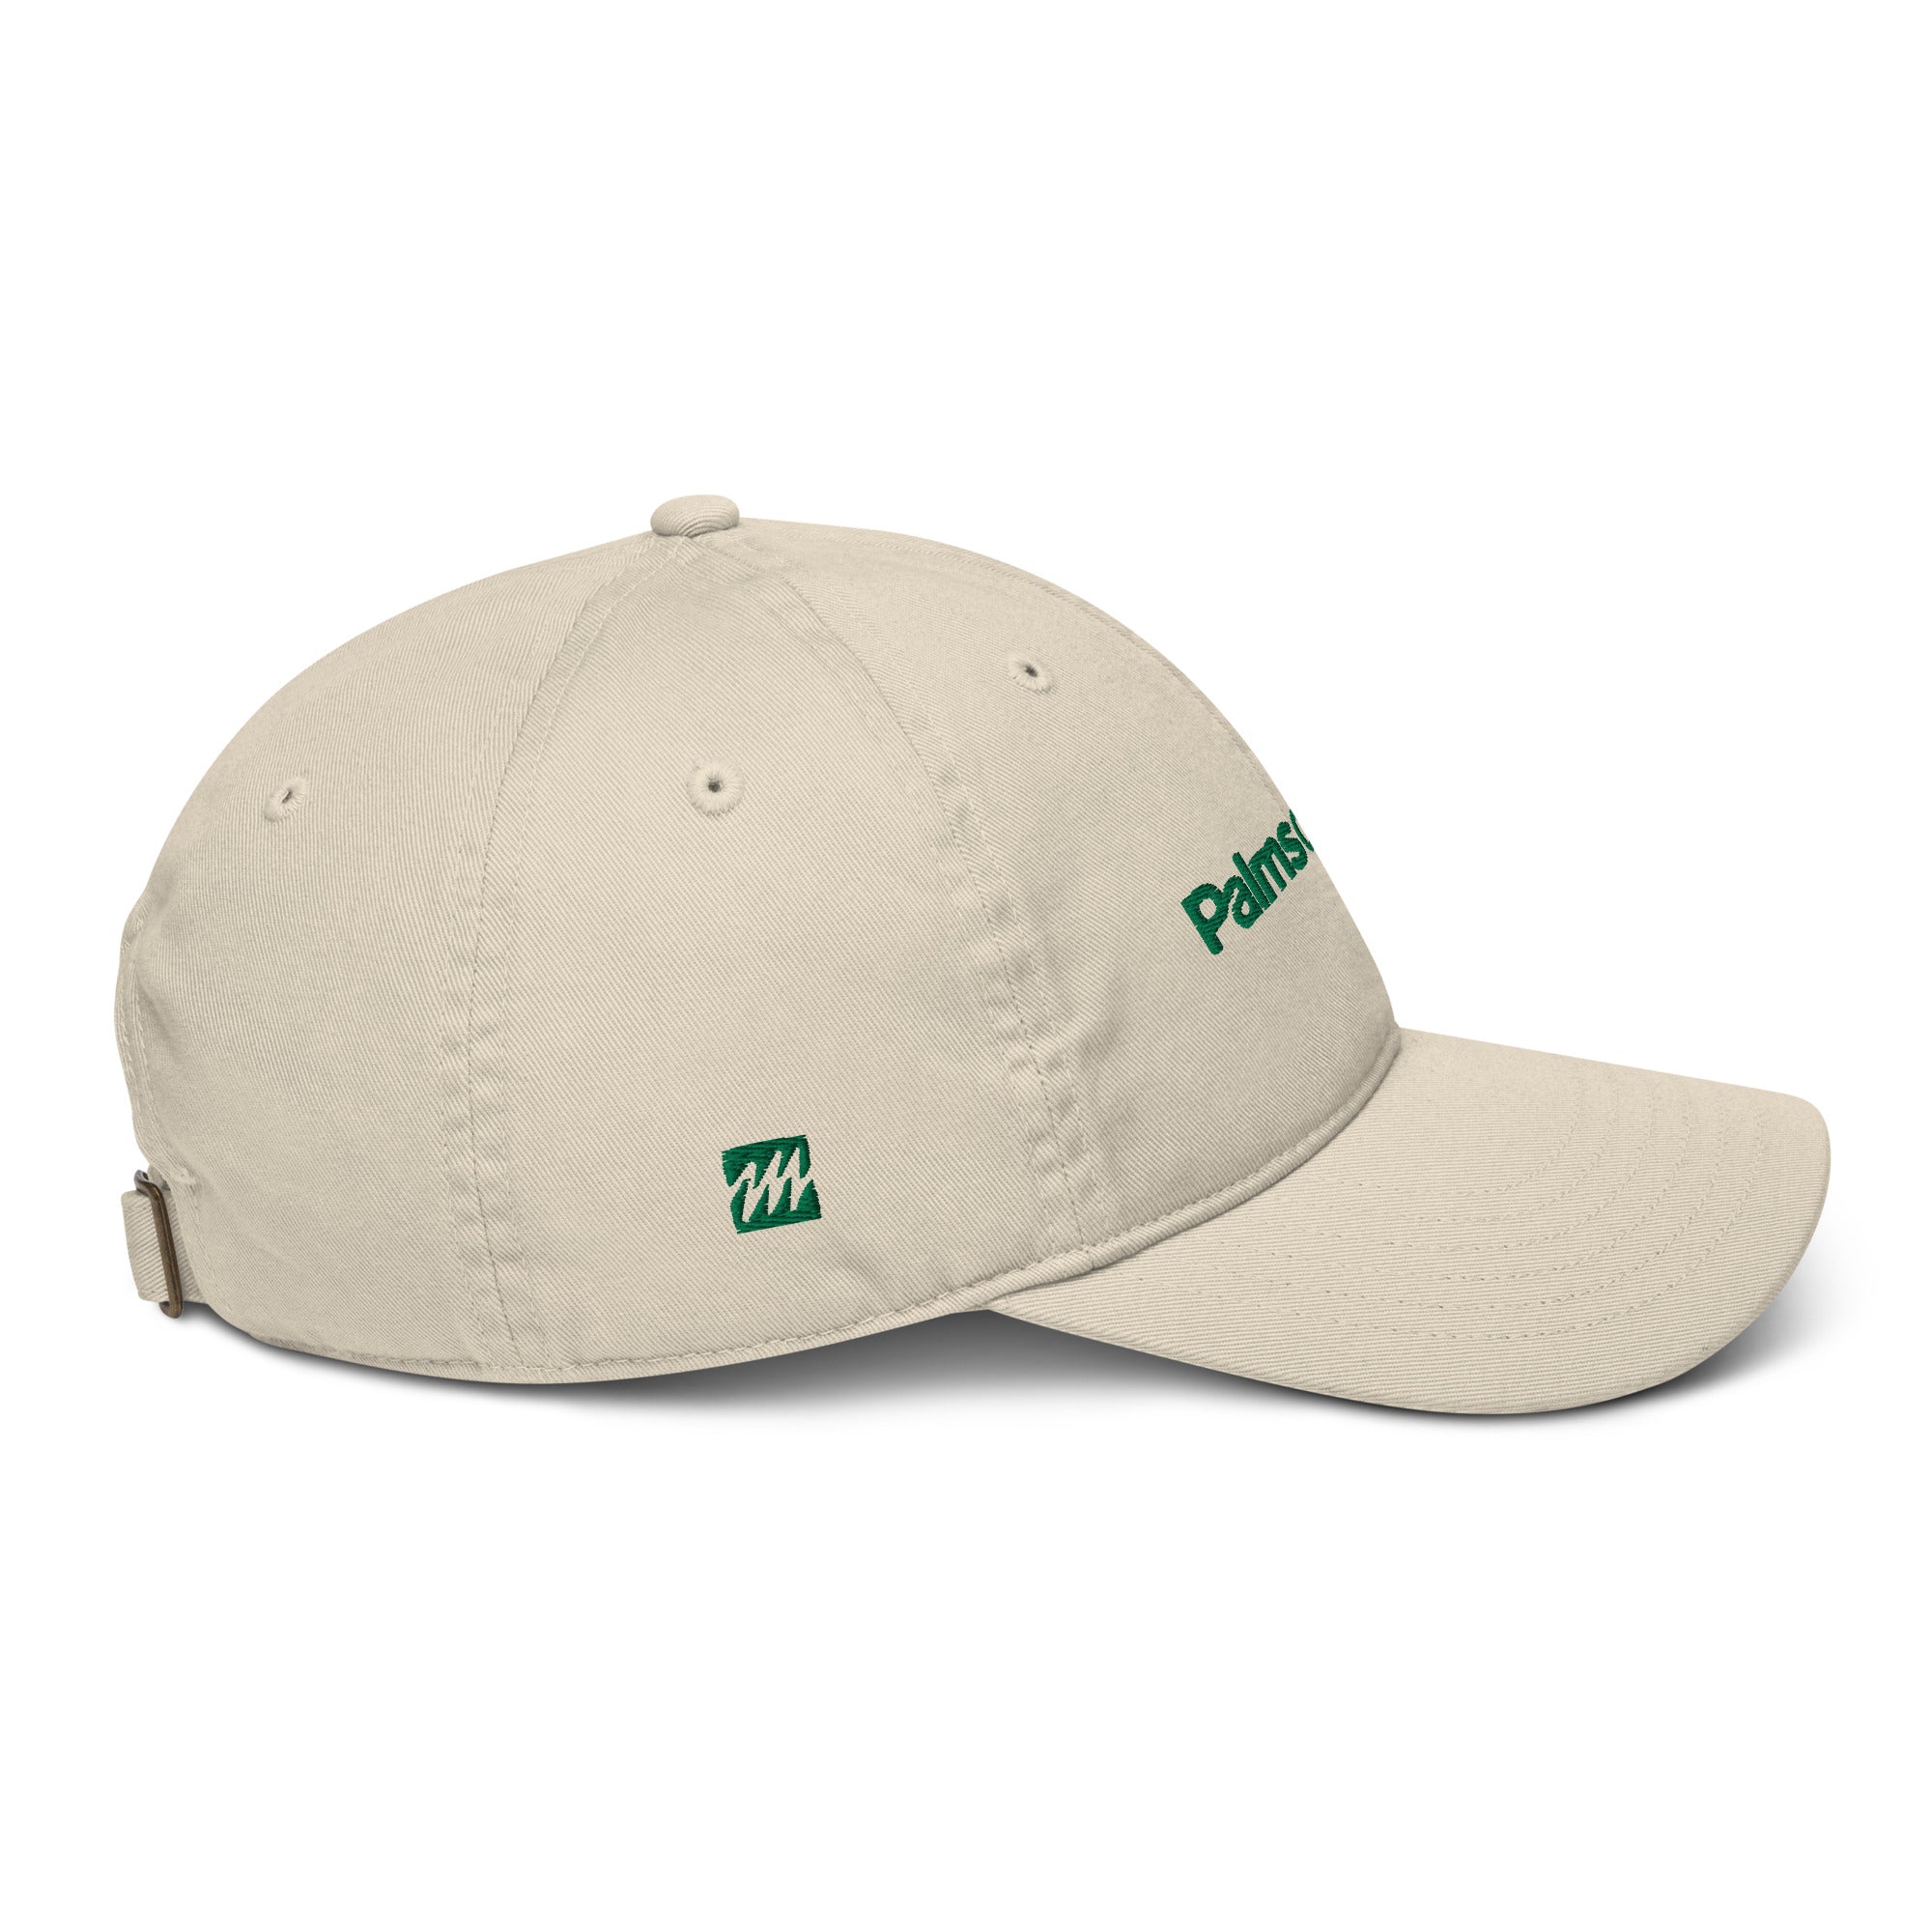 Palms on Mars limited edition classic dad cap